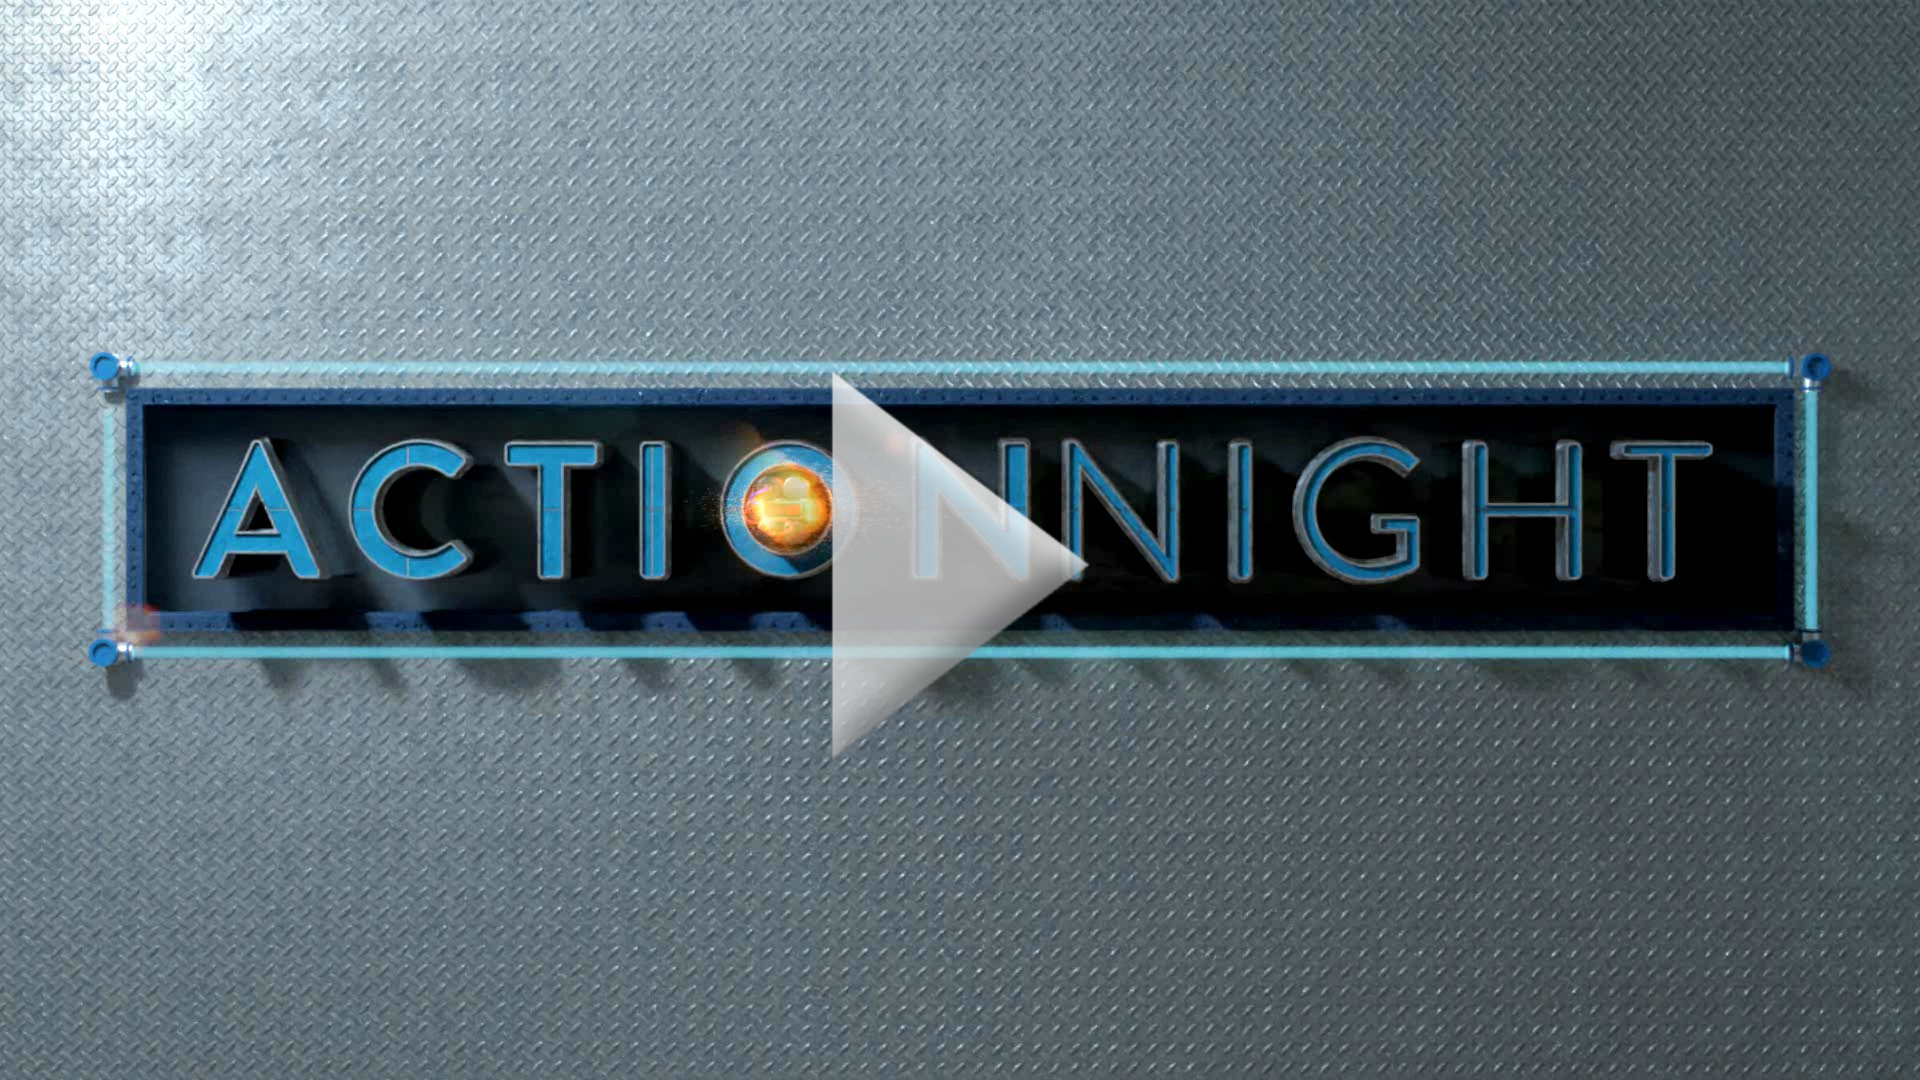 Actionnight_1920x1080px